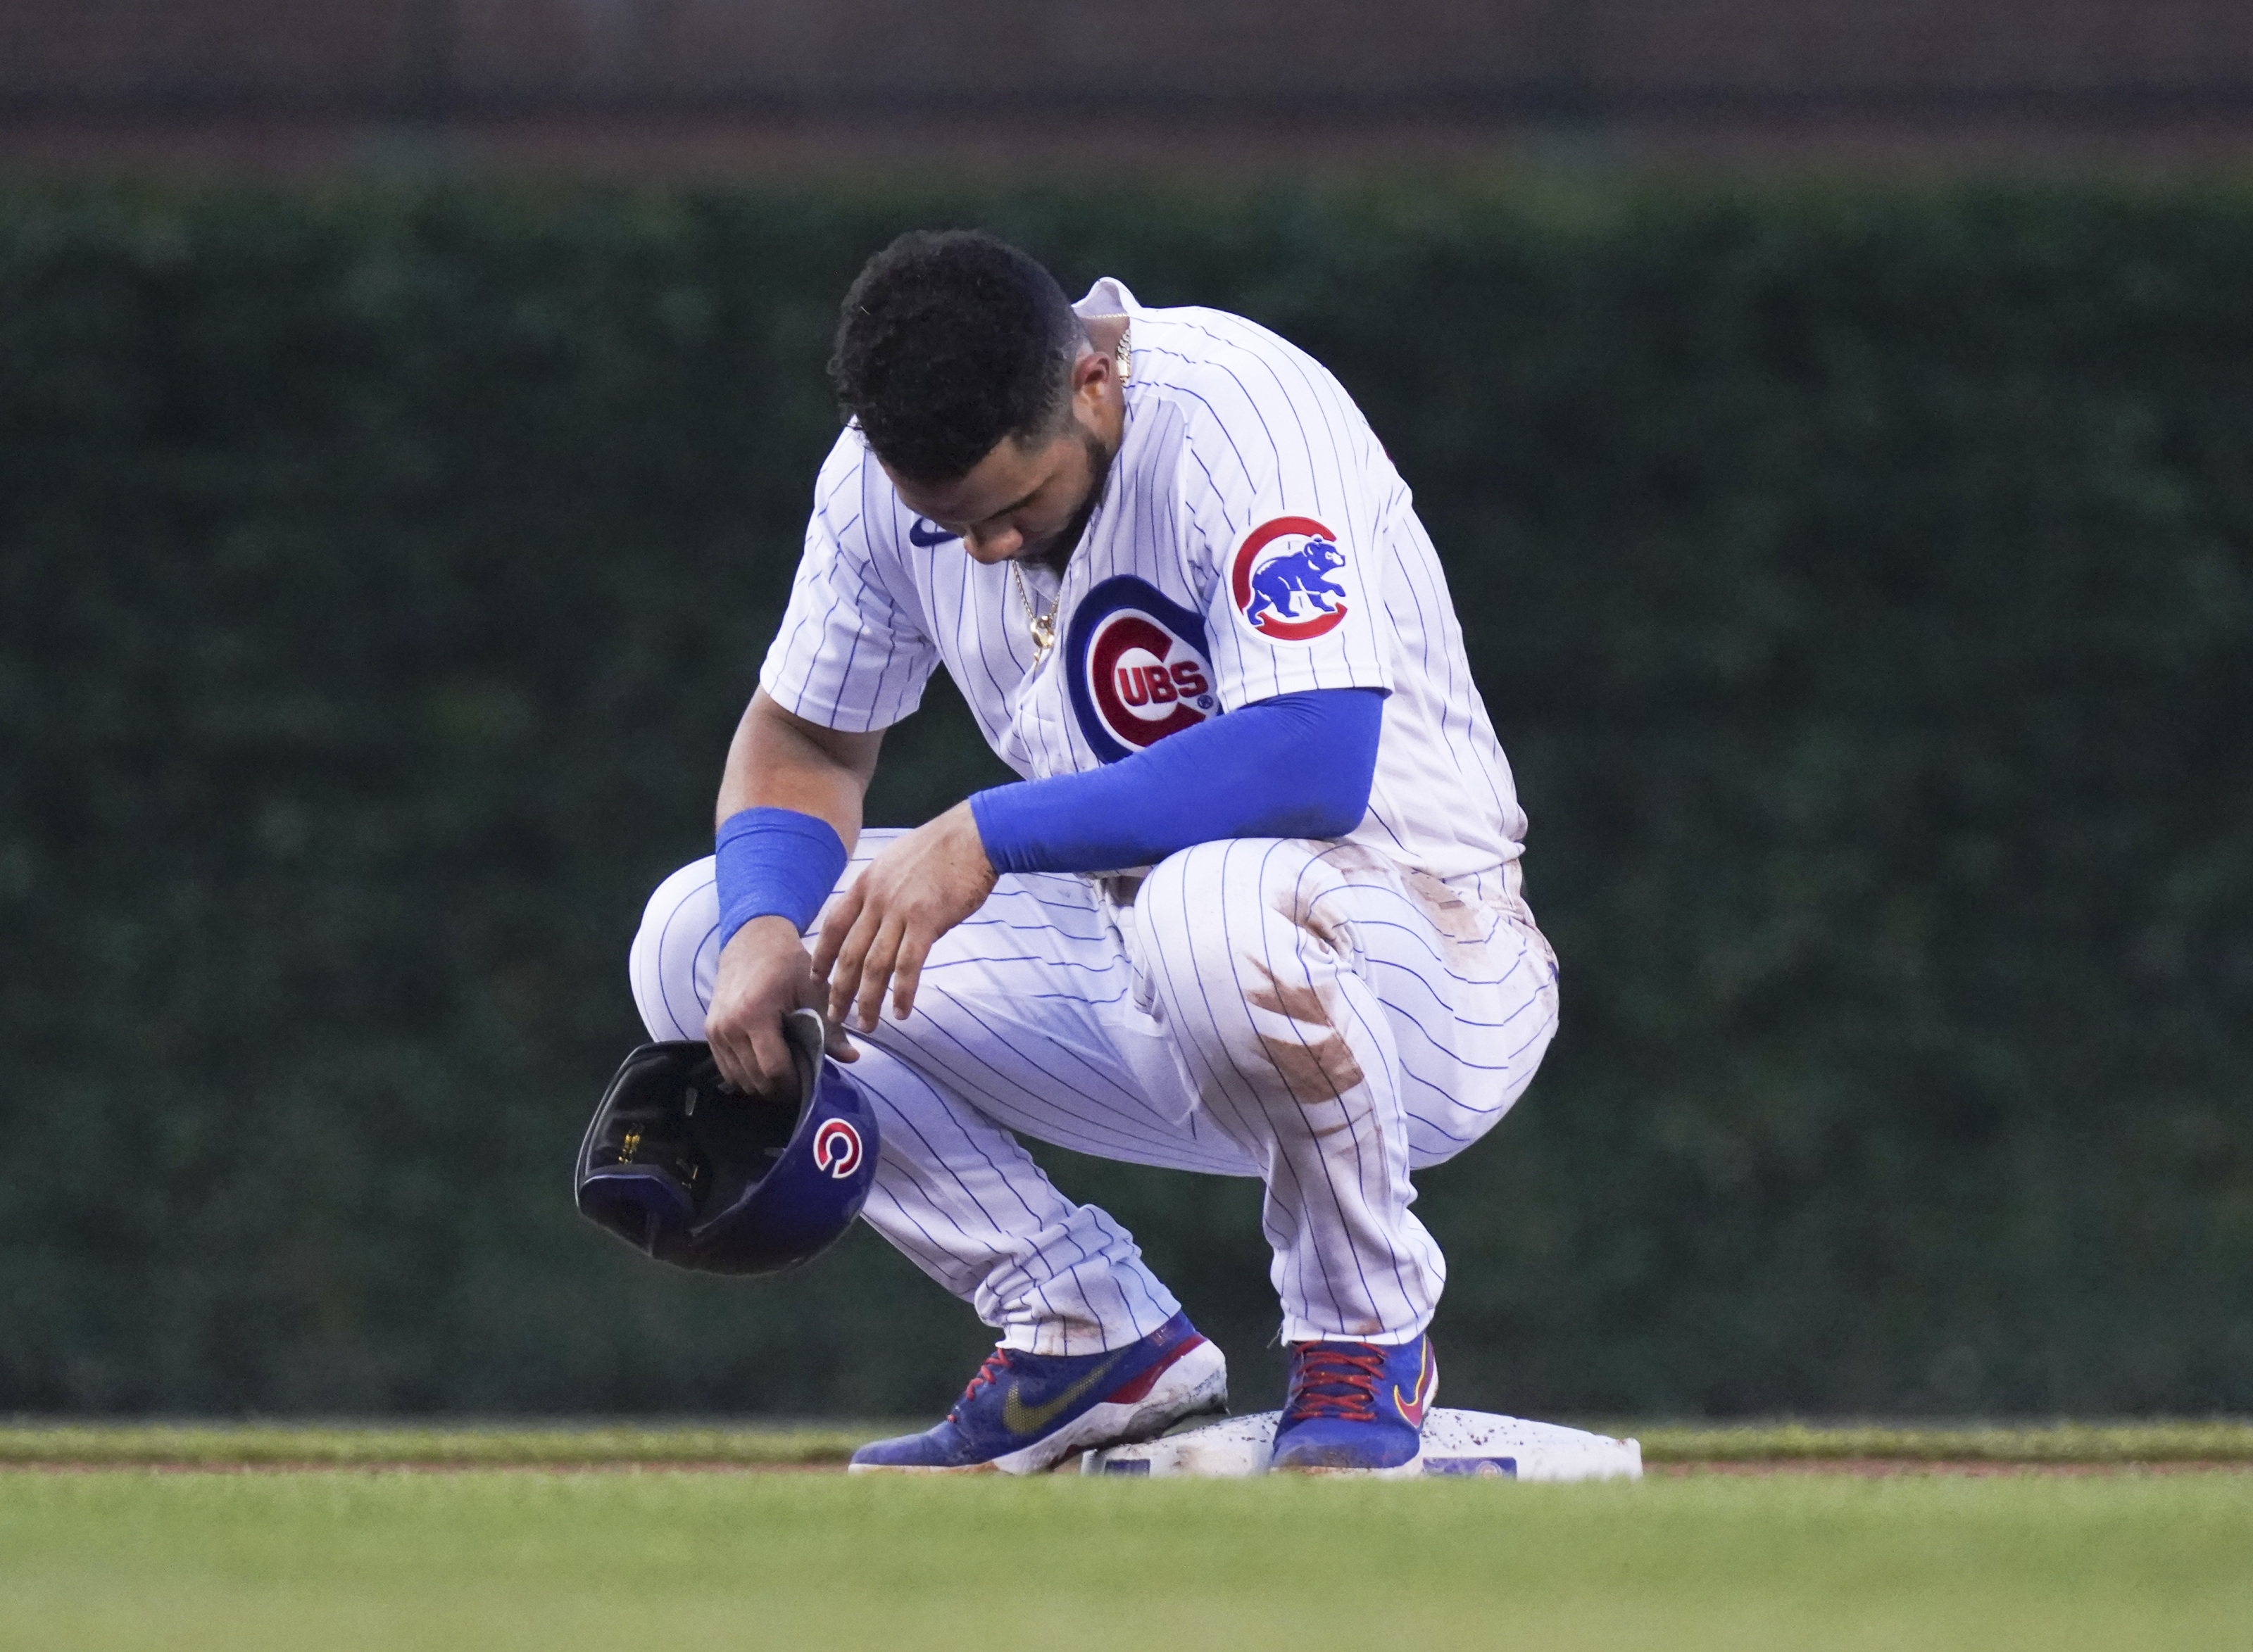 How Should the Cubs Handle Willson Contreras the Rest of the